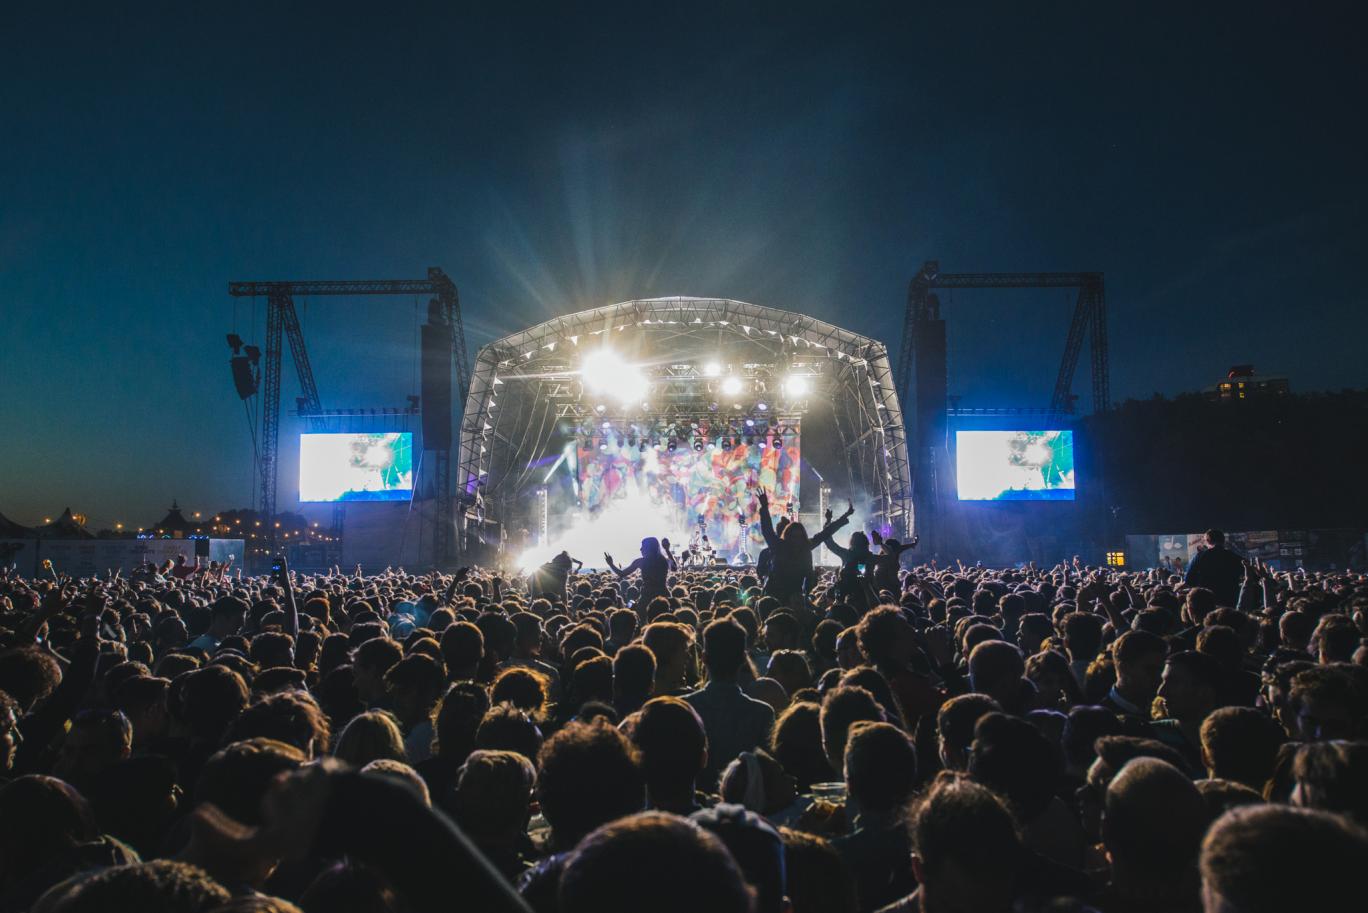 Field Day festival took place in Victoria Park in London on the weekend of 11 - 12 June